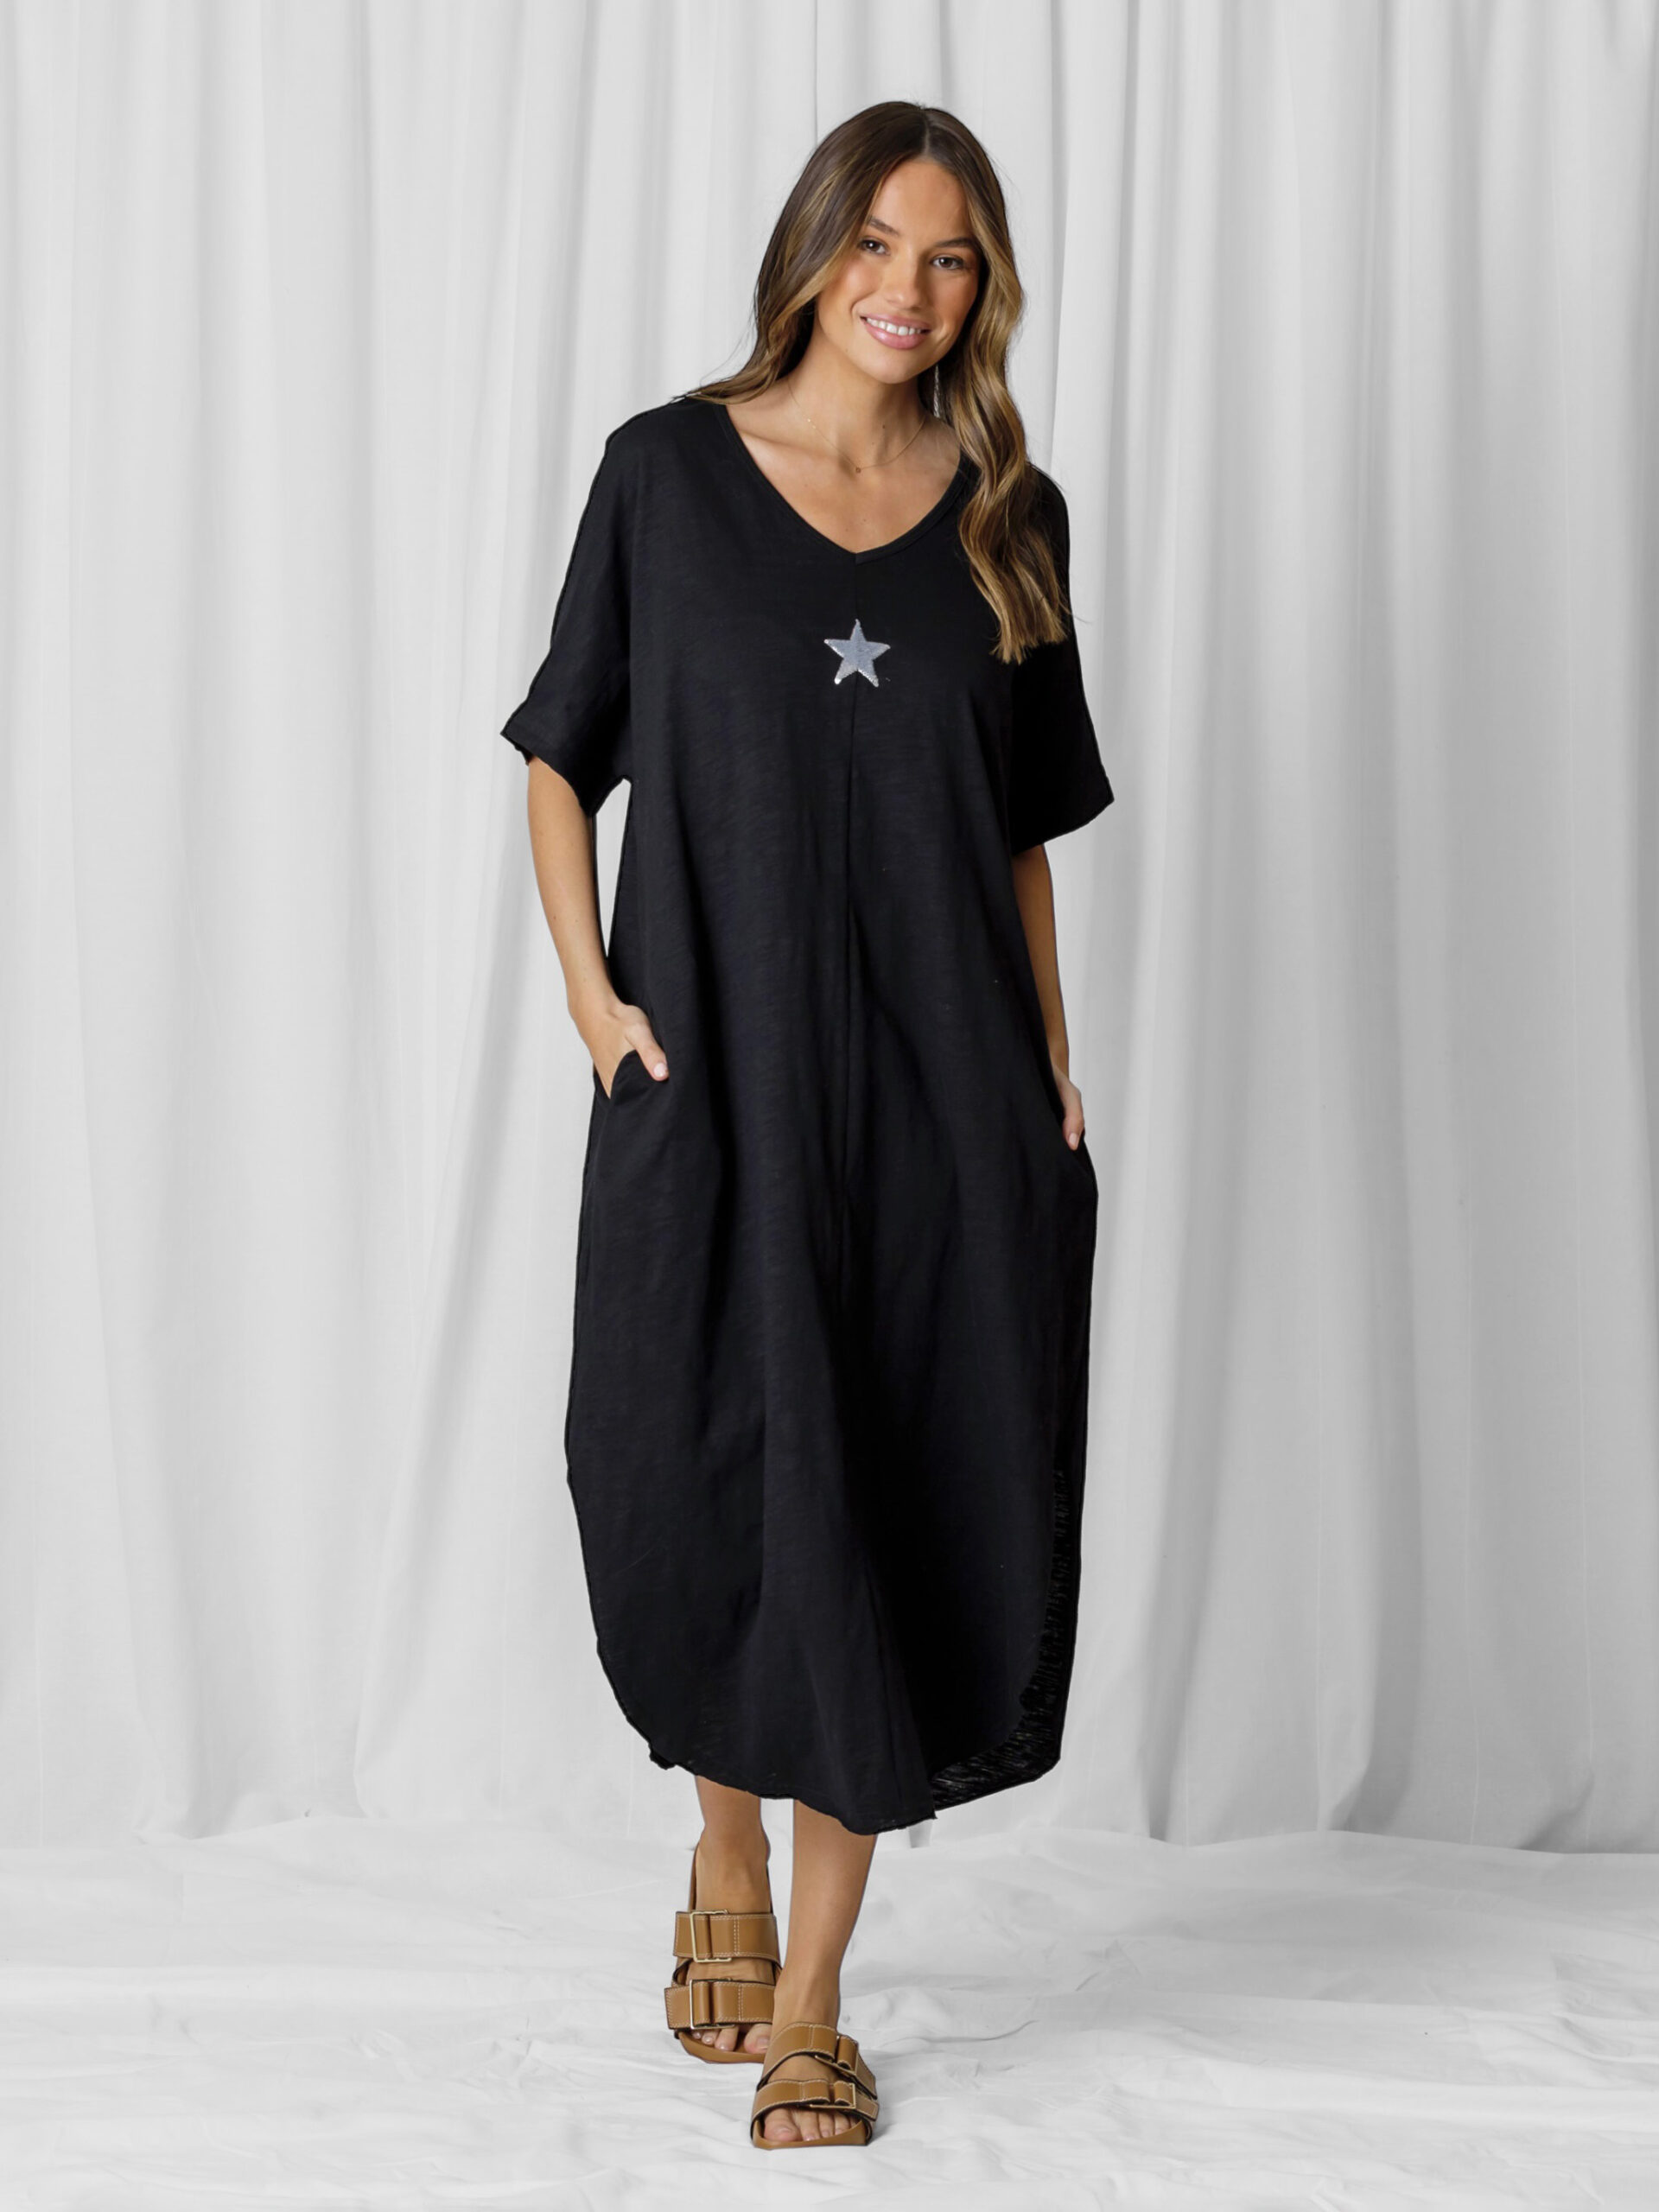 Star Tee Dress White Love Lily The Label